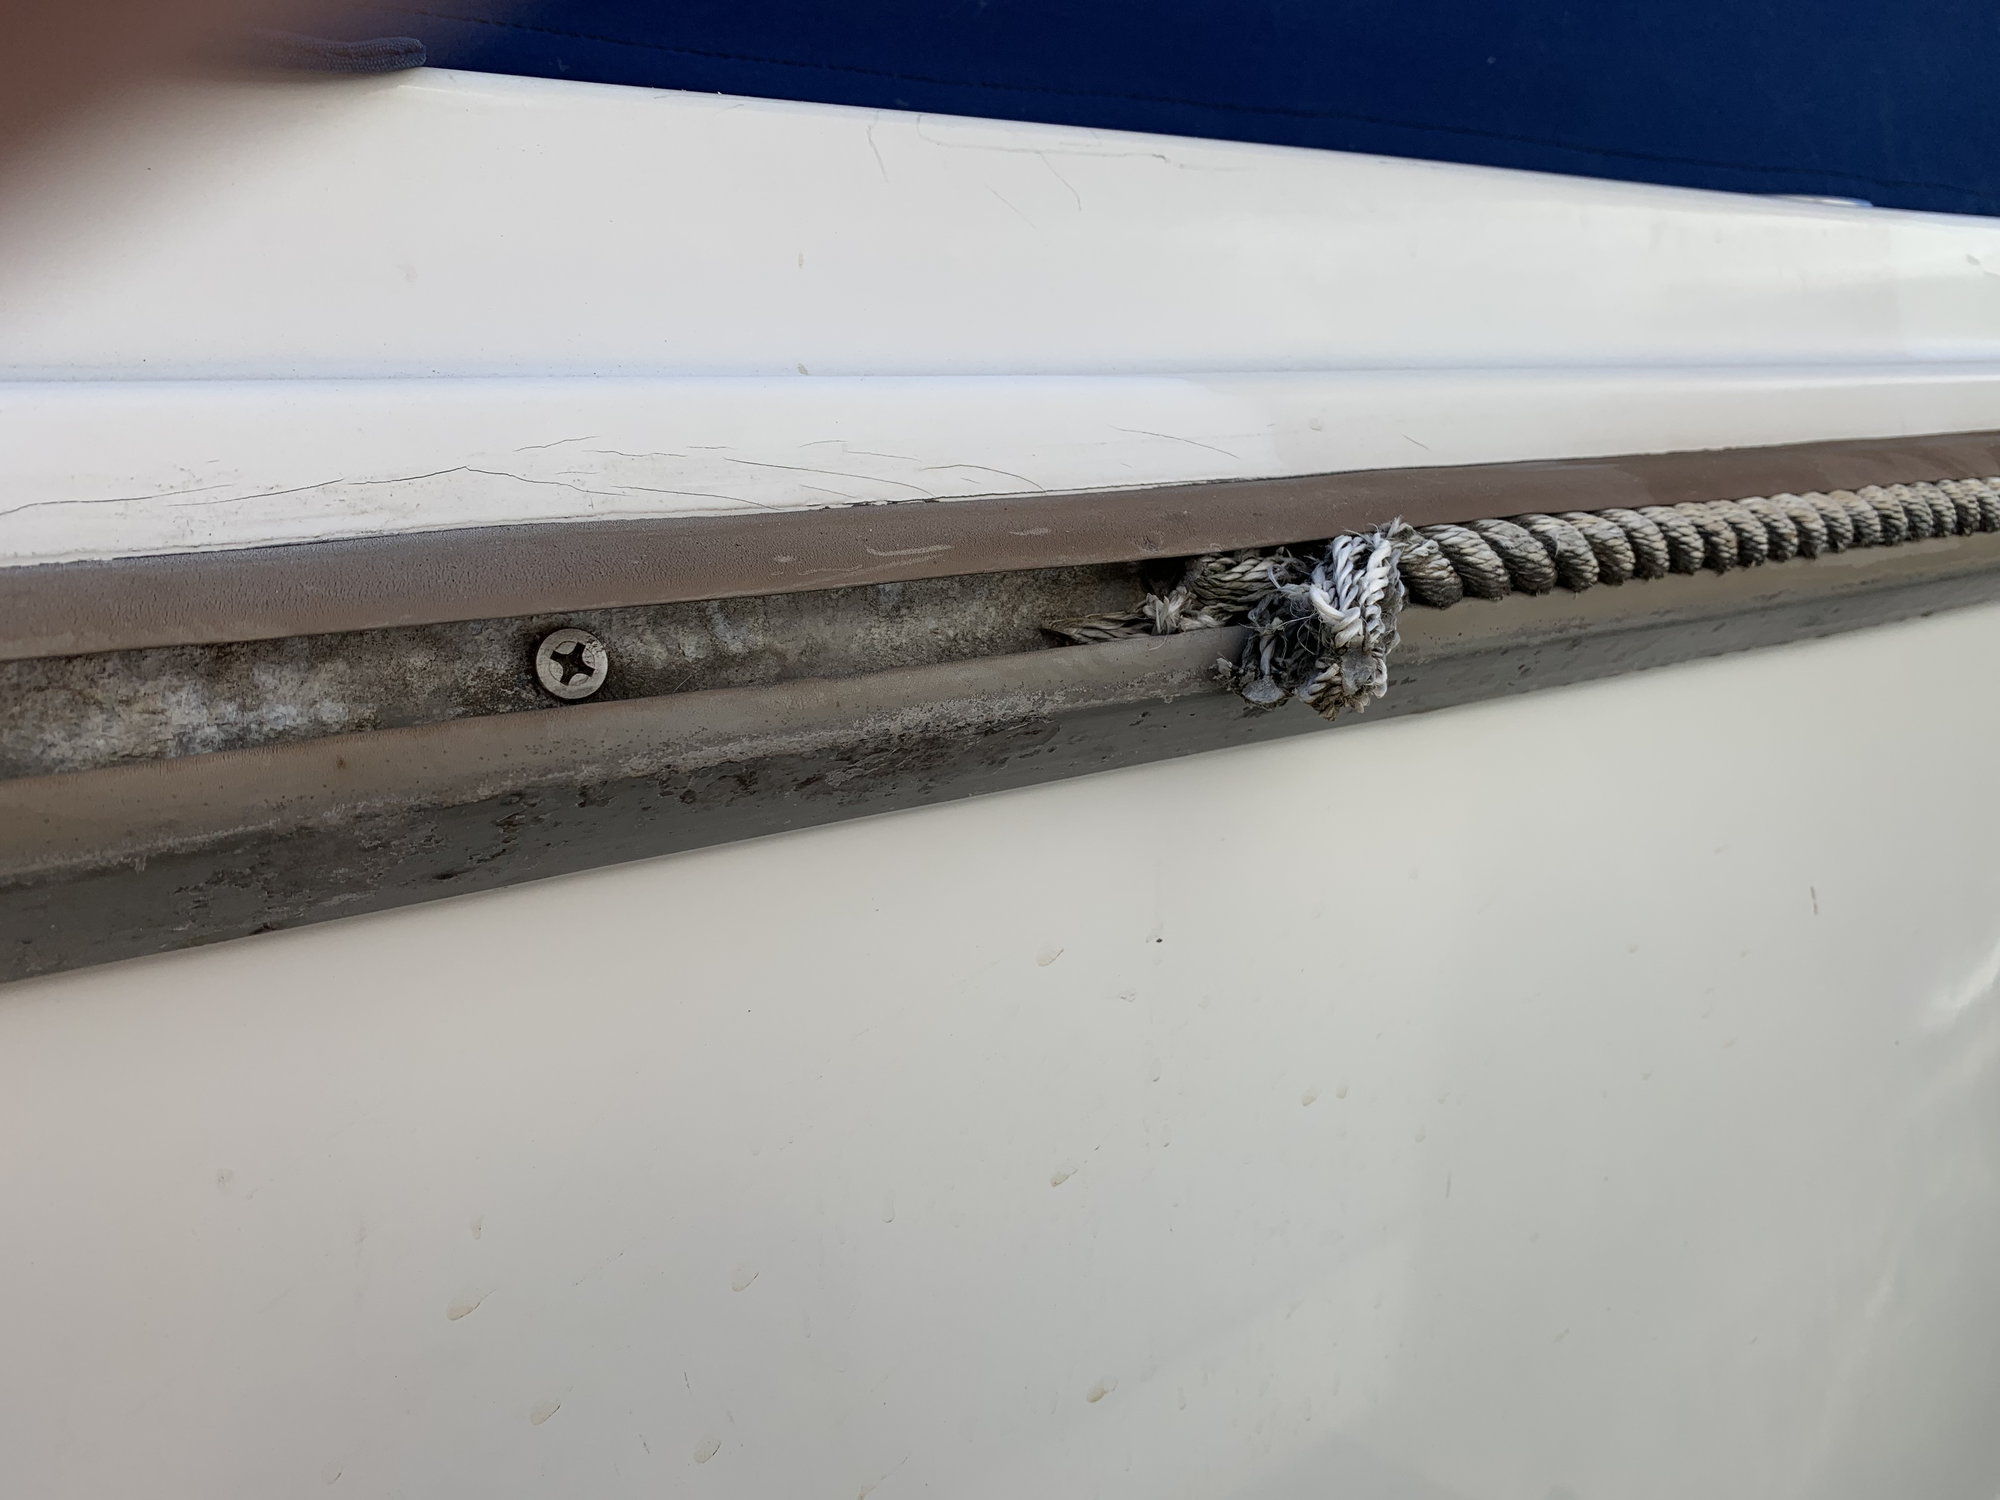 How replace rope rub rail?? - The Hull Truth - Boating and Fishing Forum